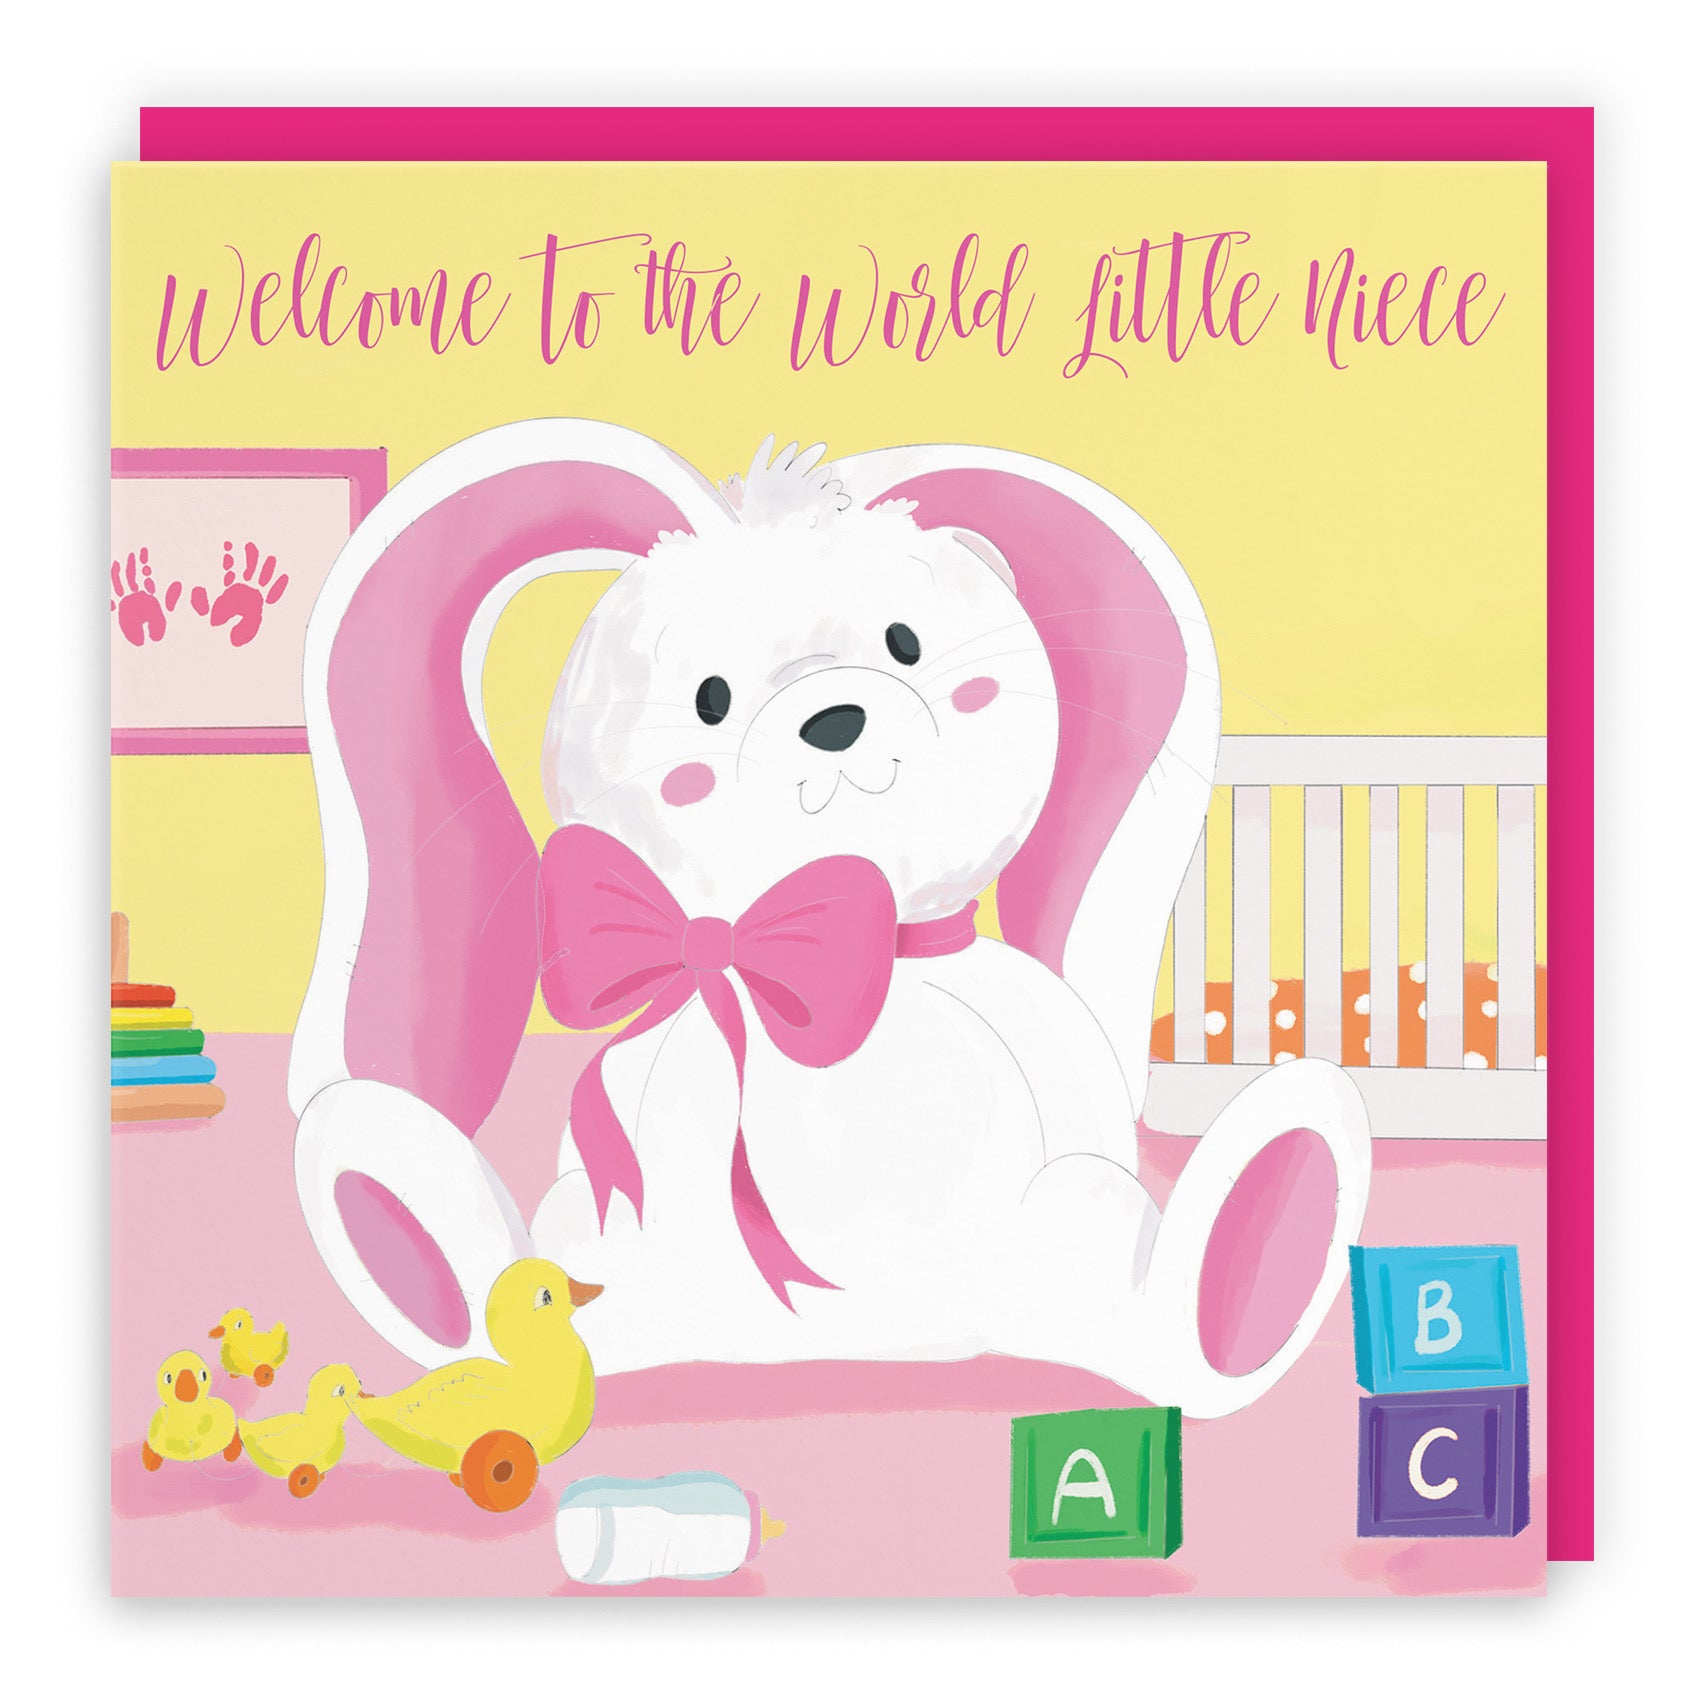 Welcome To The World Little Niece Card Pink Rabbit Classic - Default Title (B09VM9WD6L)